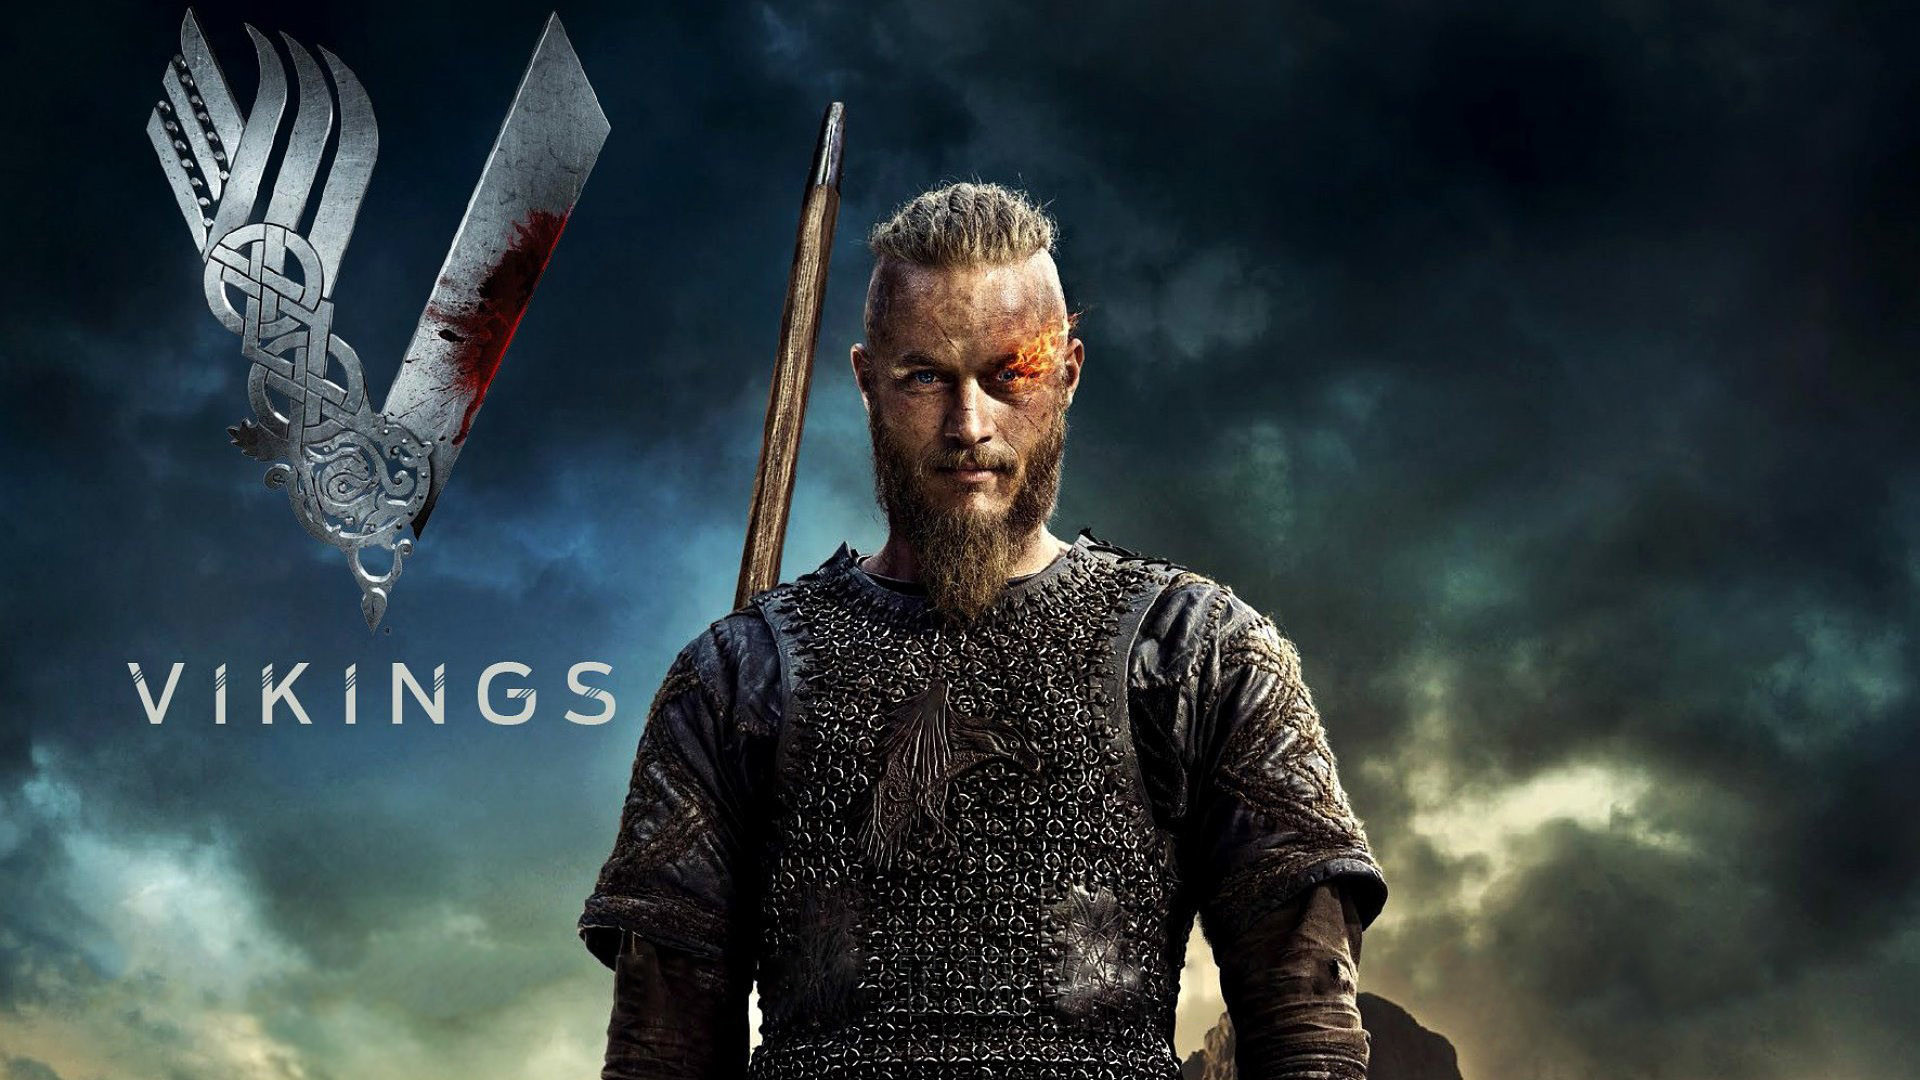 1920x1080 240 Vikings HD Wallpapers | Backgrounds - Wallpaper Abyss ...